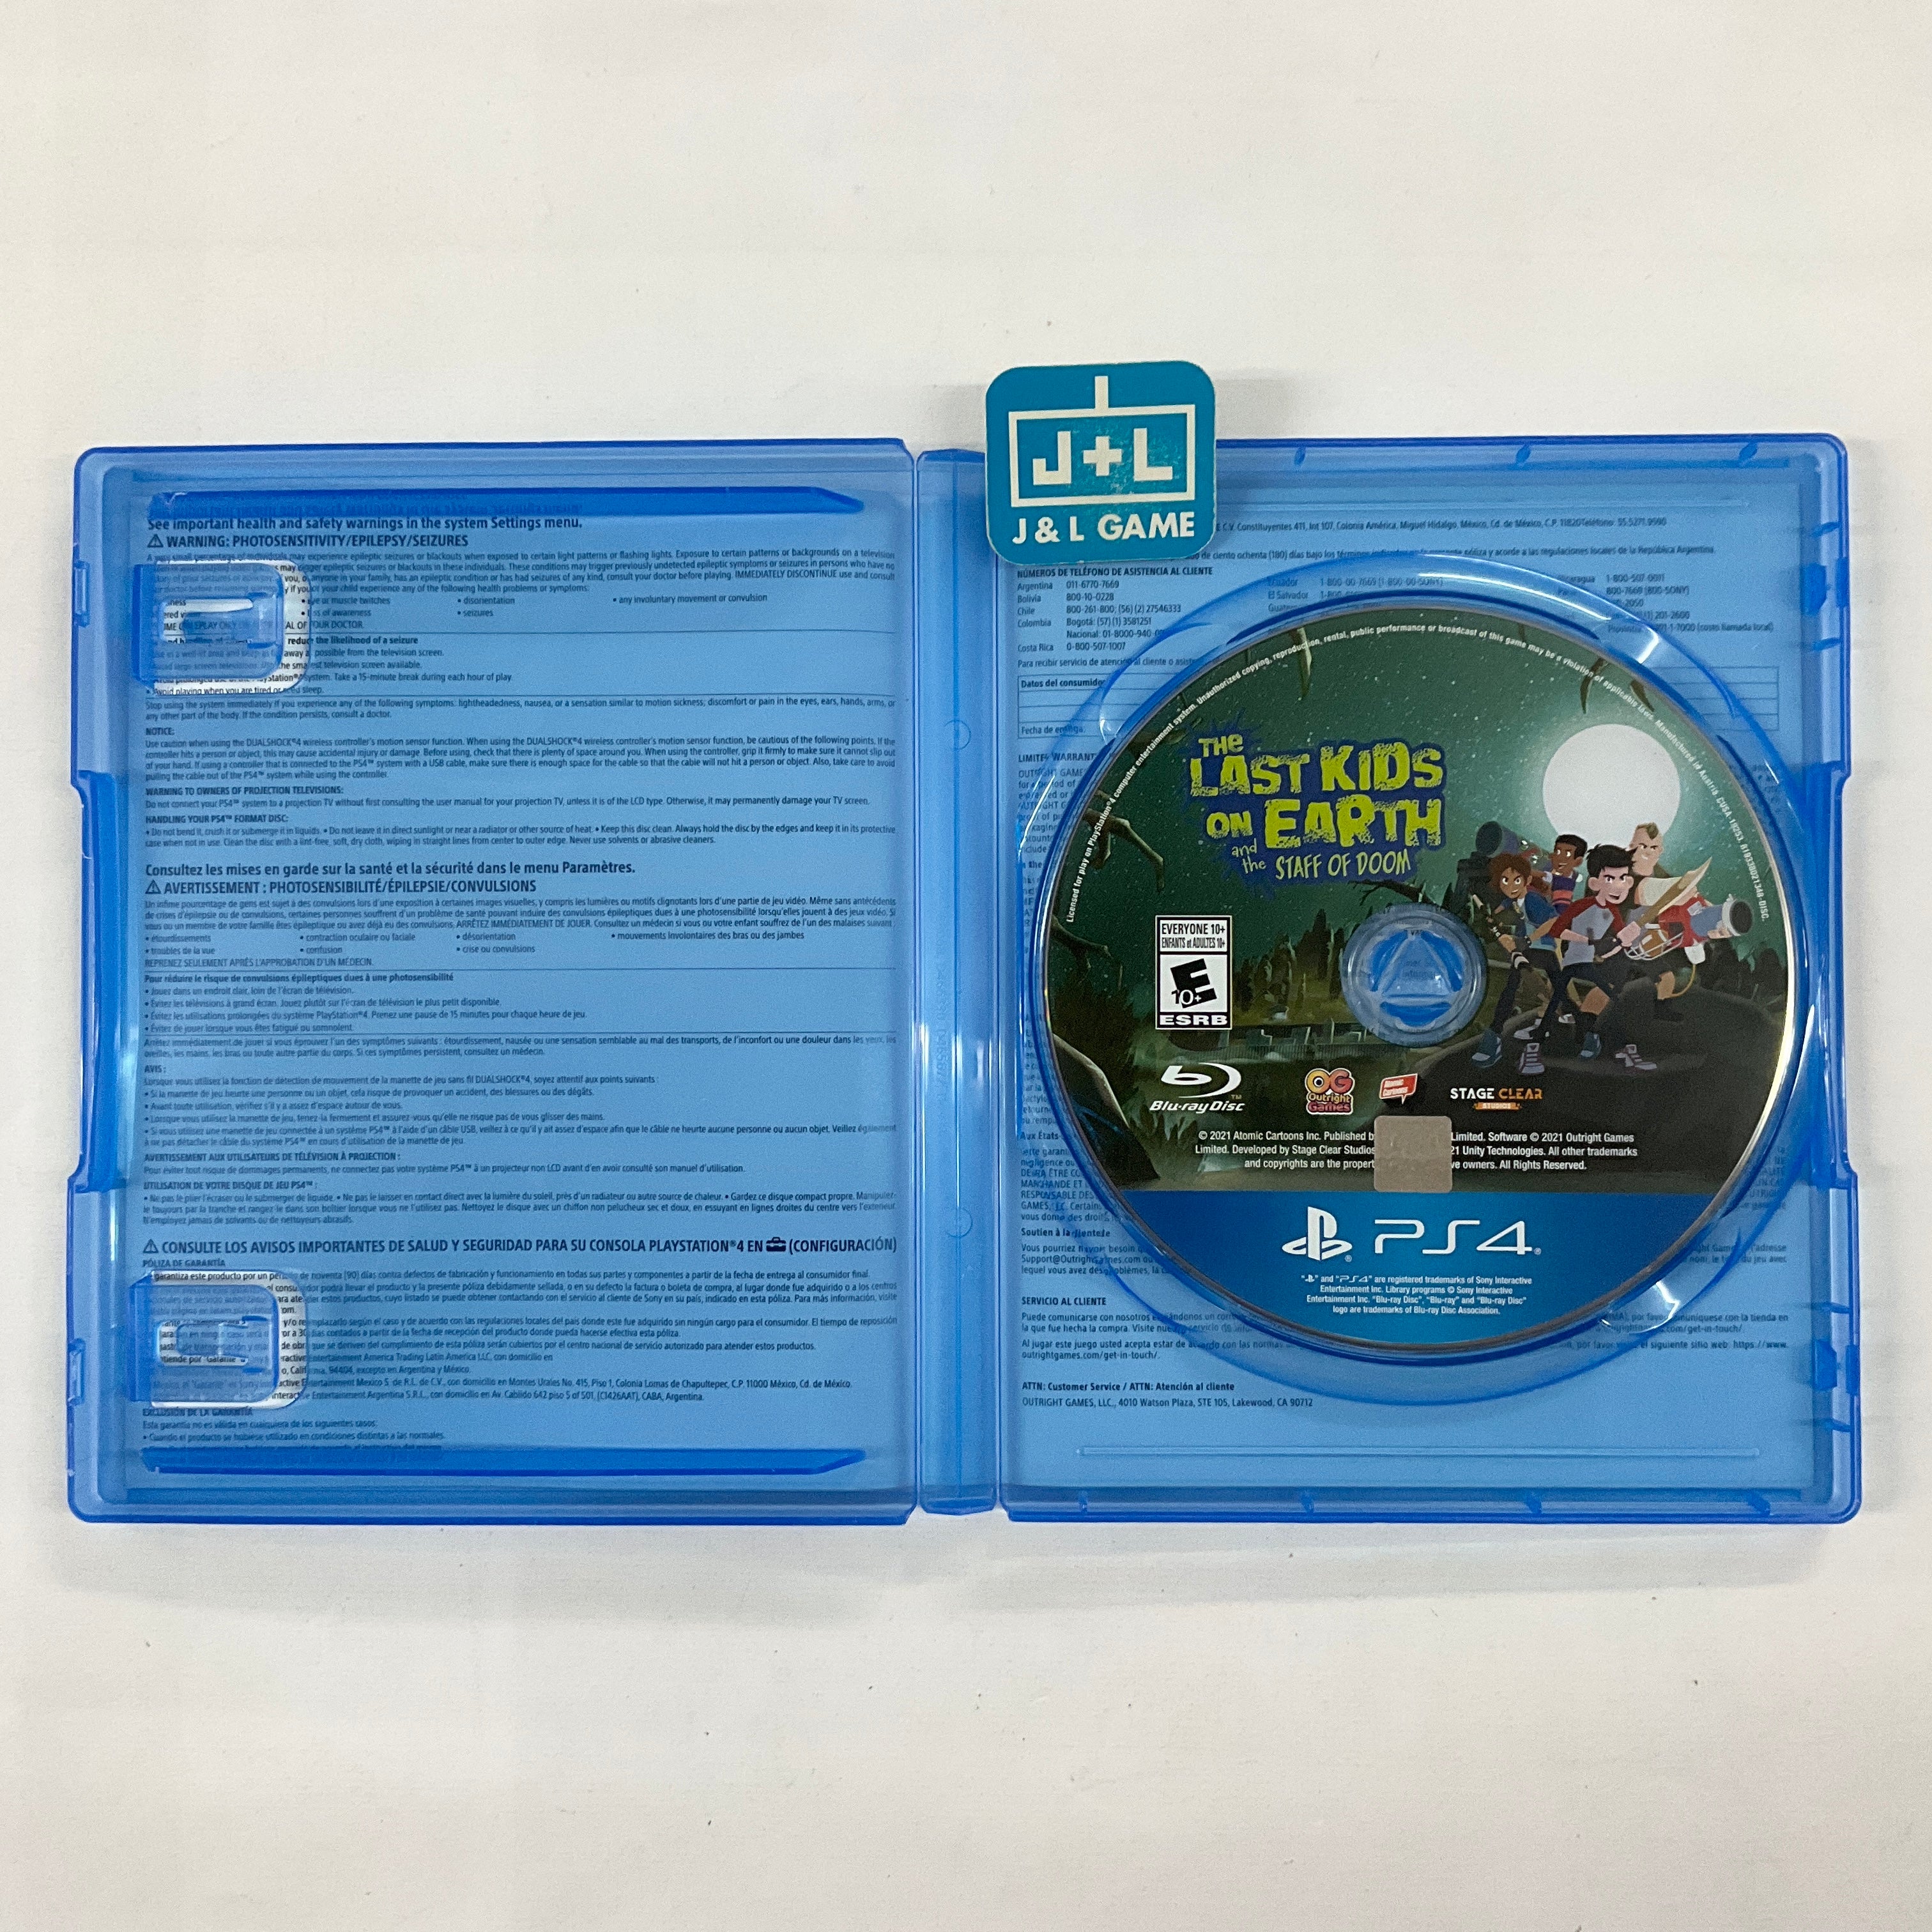 The Last Kids On Earth and the Staff of Doom - (PS4) PlayStation 4 [Pre-Owned] Video Games Outright Games   